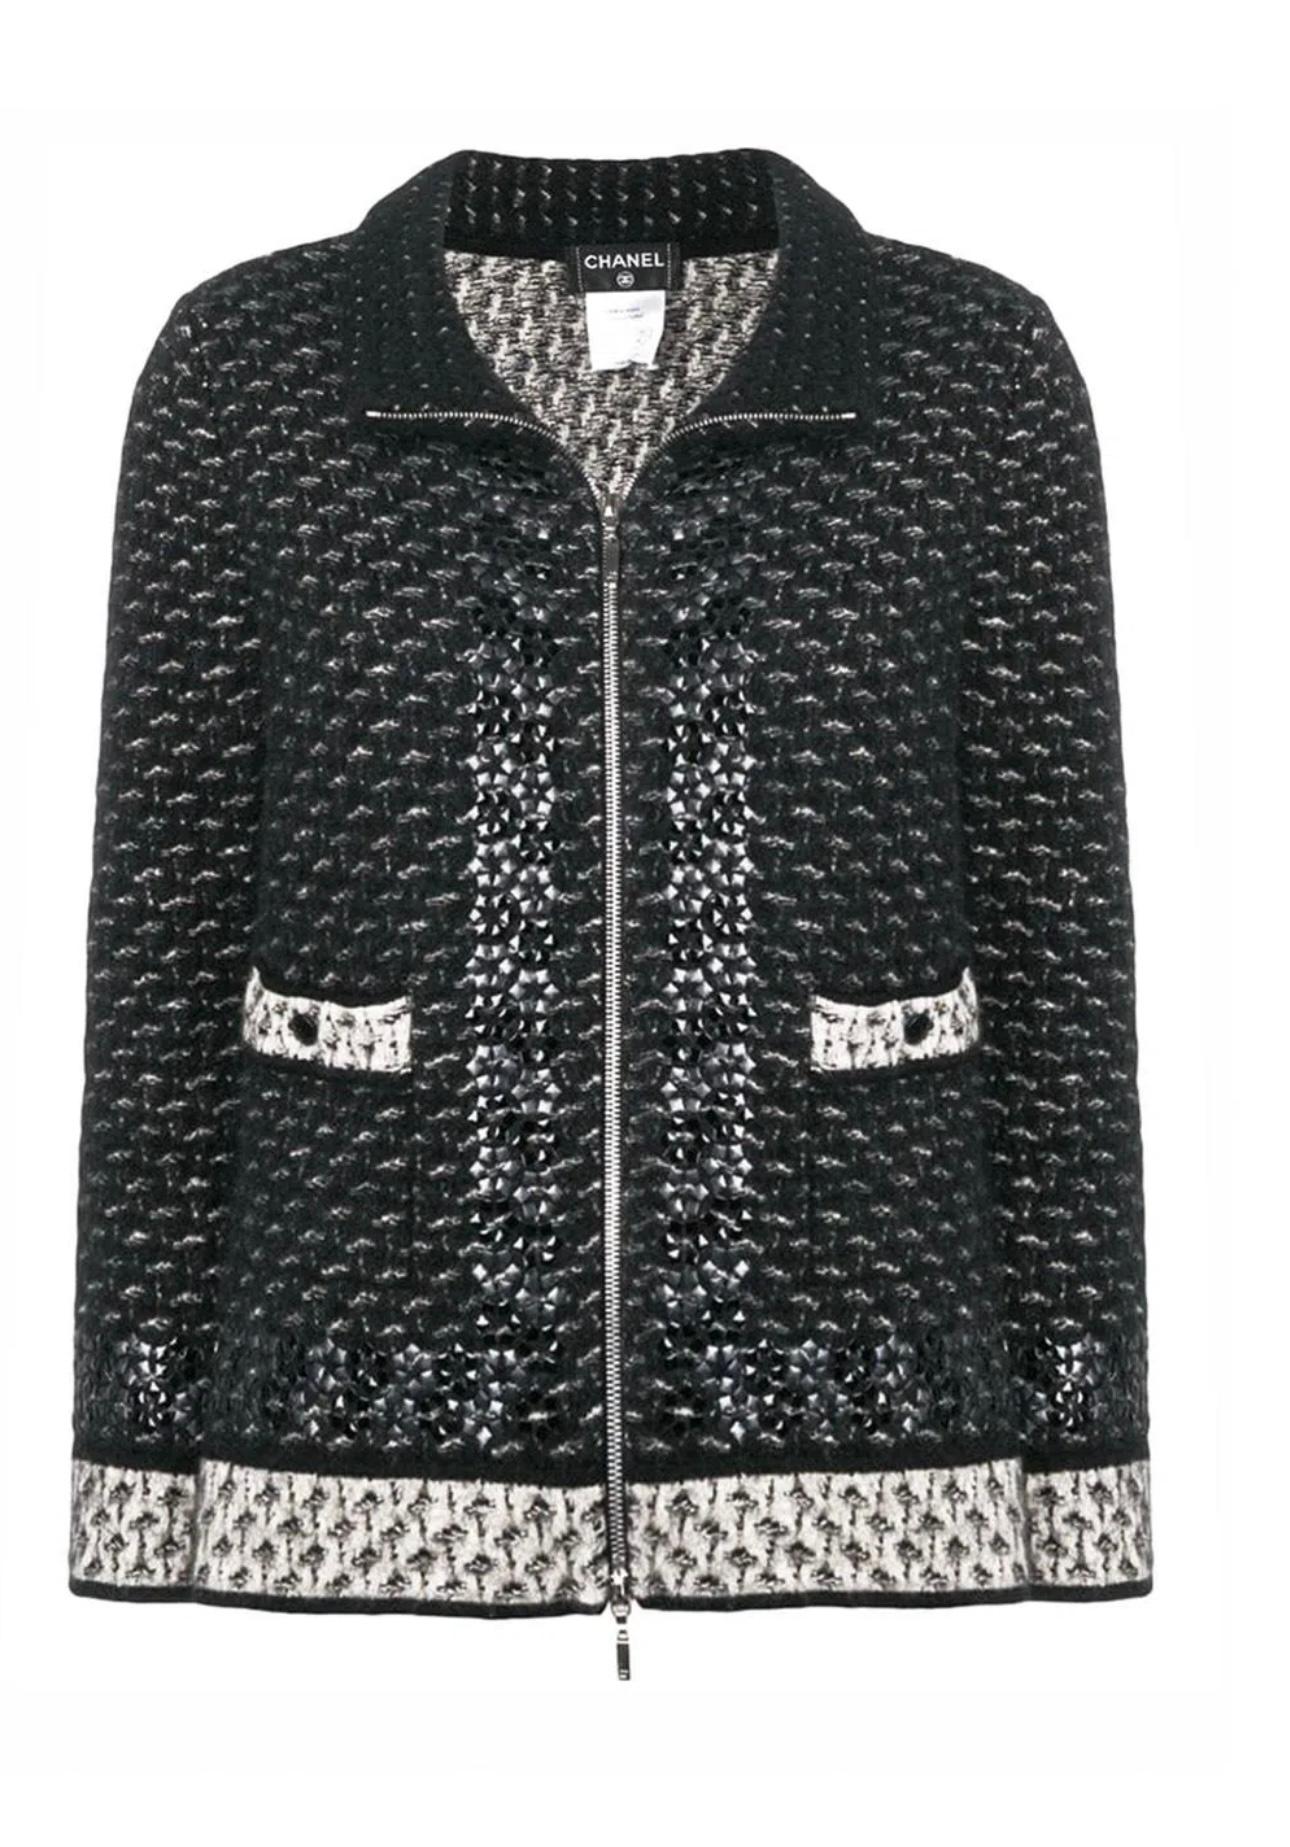 Chanel Black Cashmere Embellished Jacket In Excellent Condition For Sale In Dubai, AE